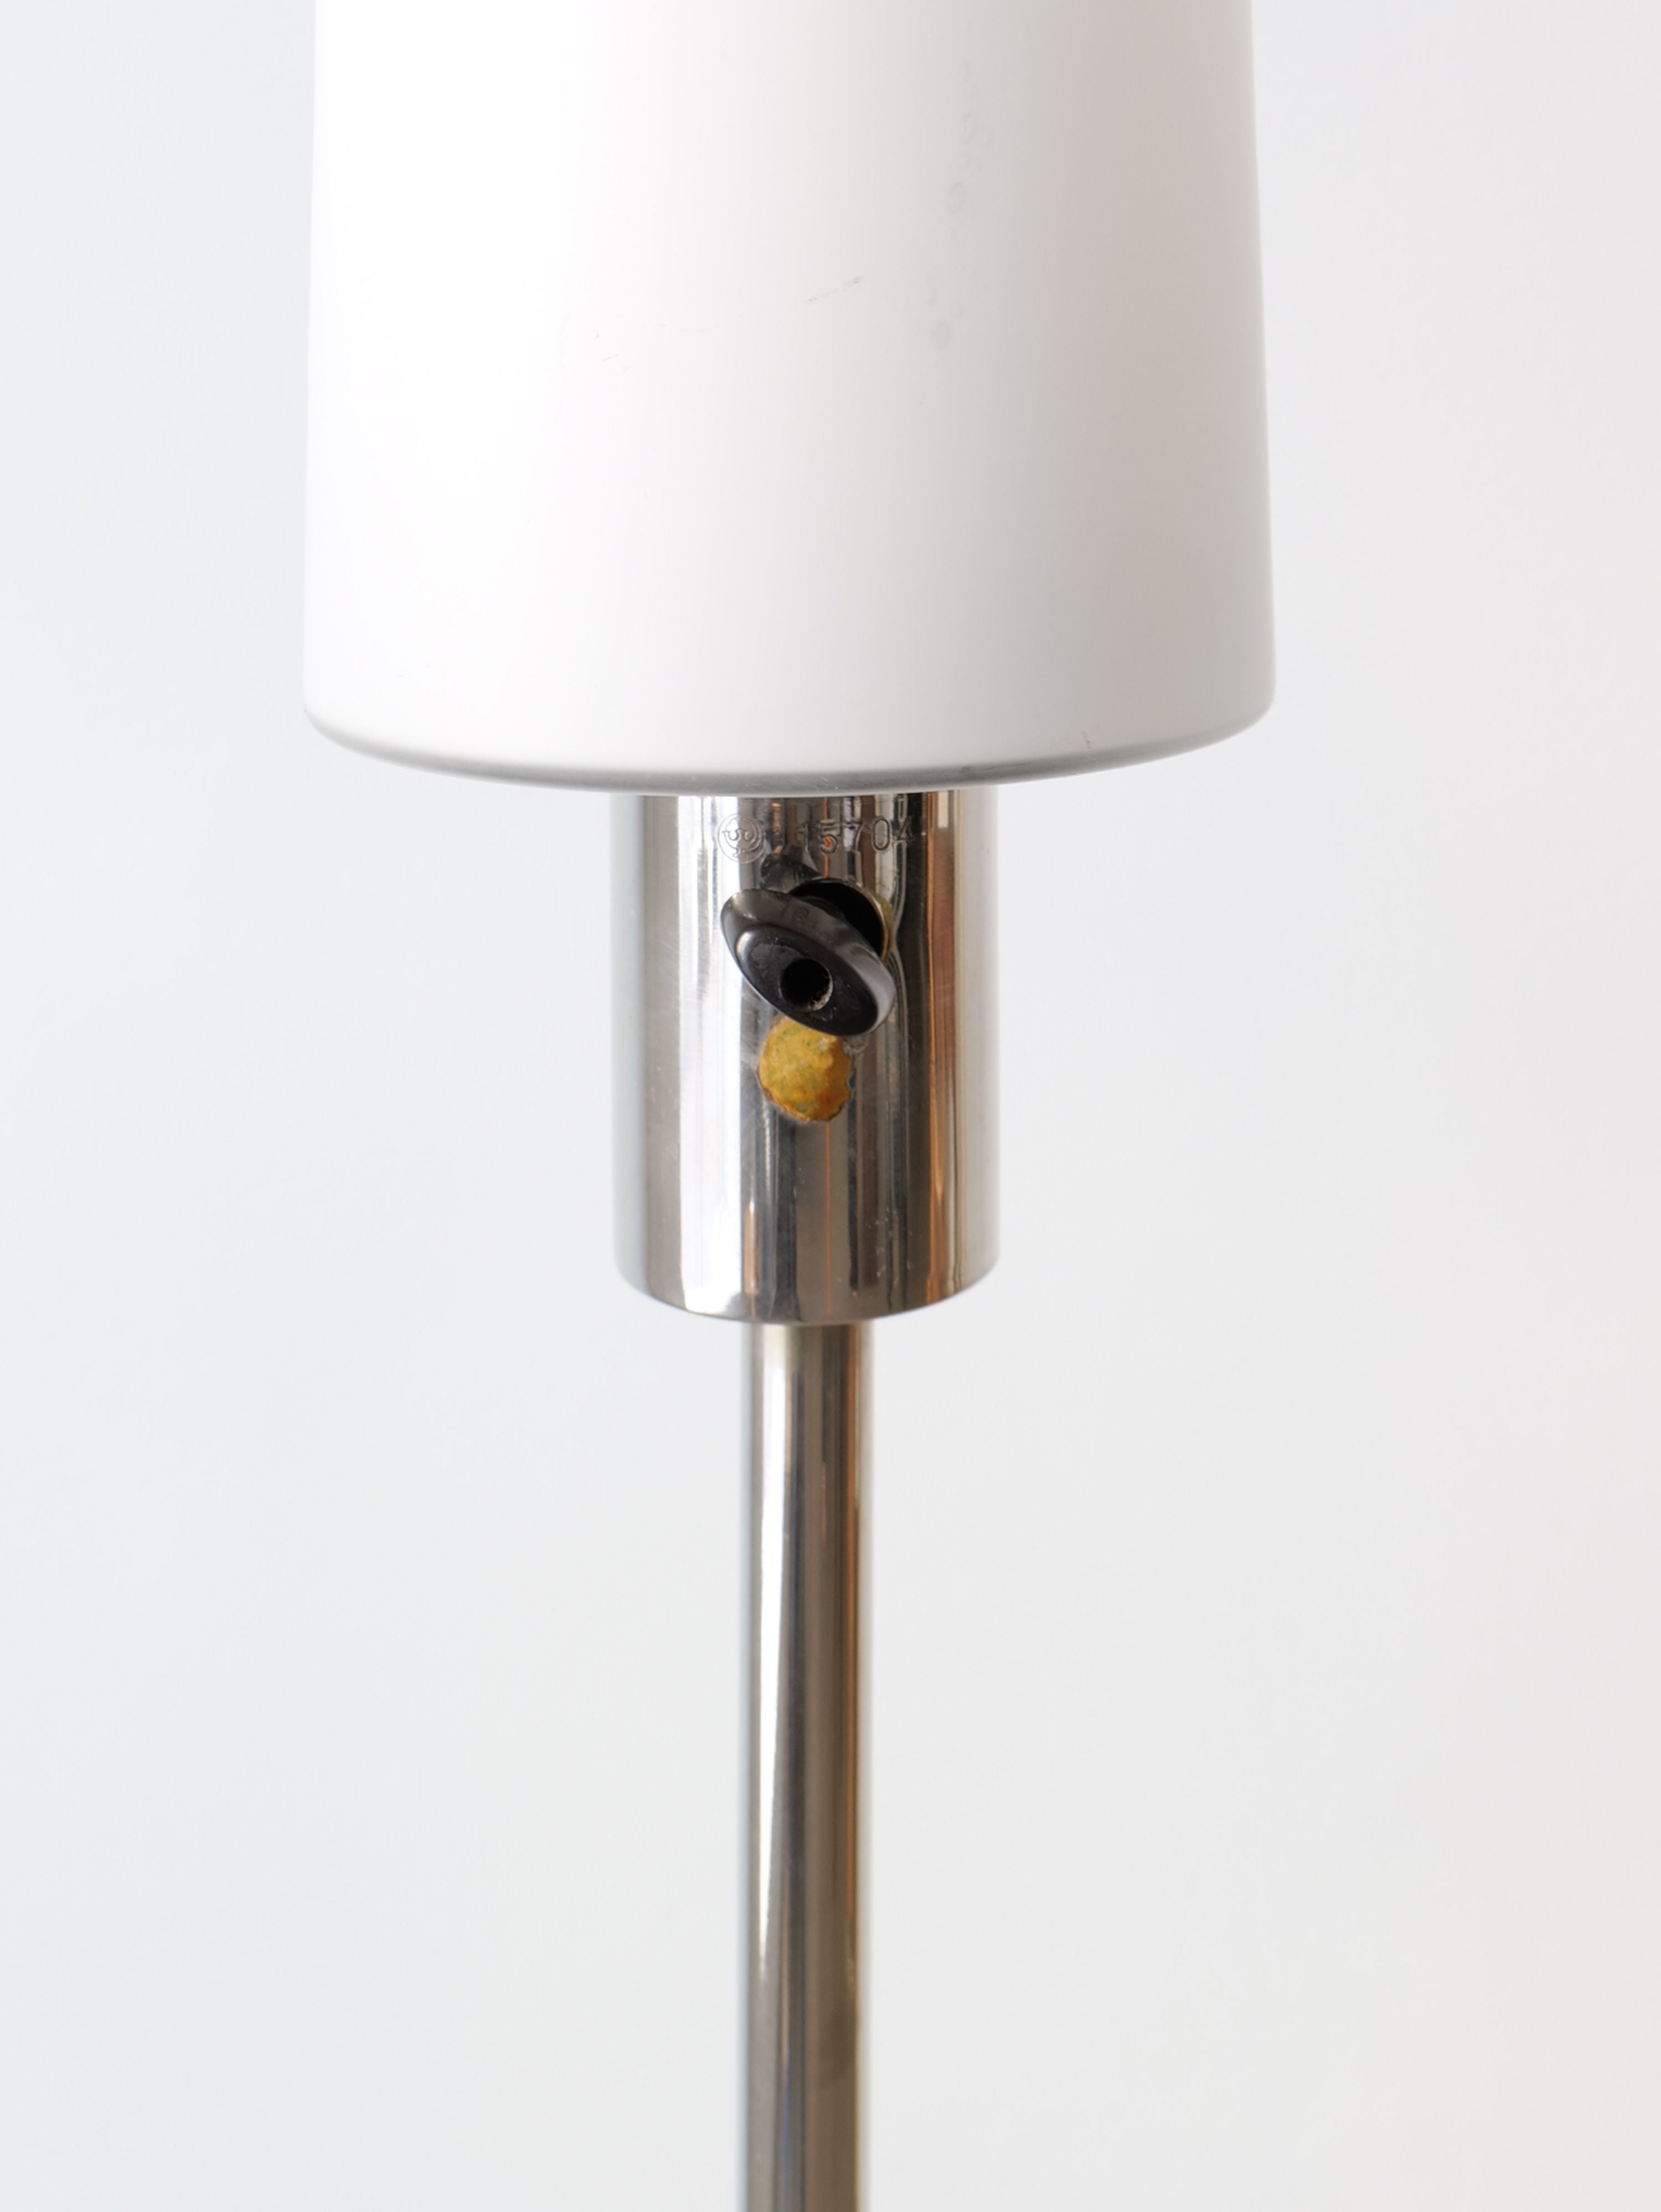 A close-up view of a modern metallic Deco Floor Lamp Harald Notini 1940s from Collection apart with a white lampshade. The lamp's switch is visible on the top part of the metallic base, featuring a small yellow detail beneath it. The background is plain and white, keeping the focus on the lamp's Swedish Modern design inspired by Arvid Böhlmarks Lamp Factory.